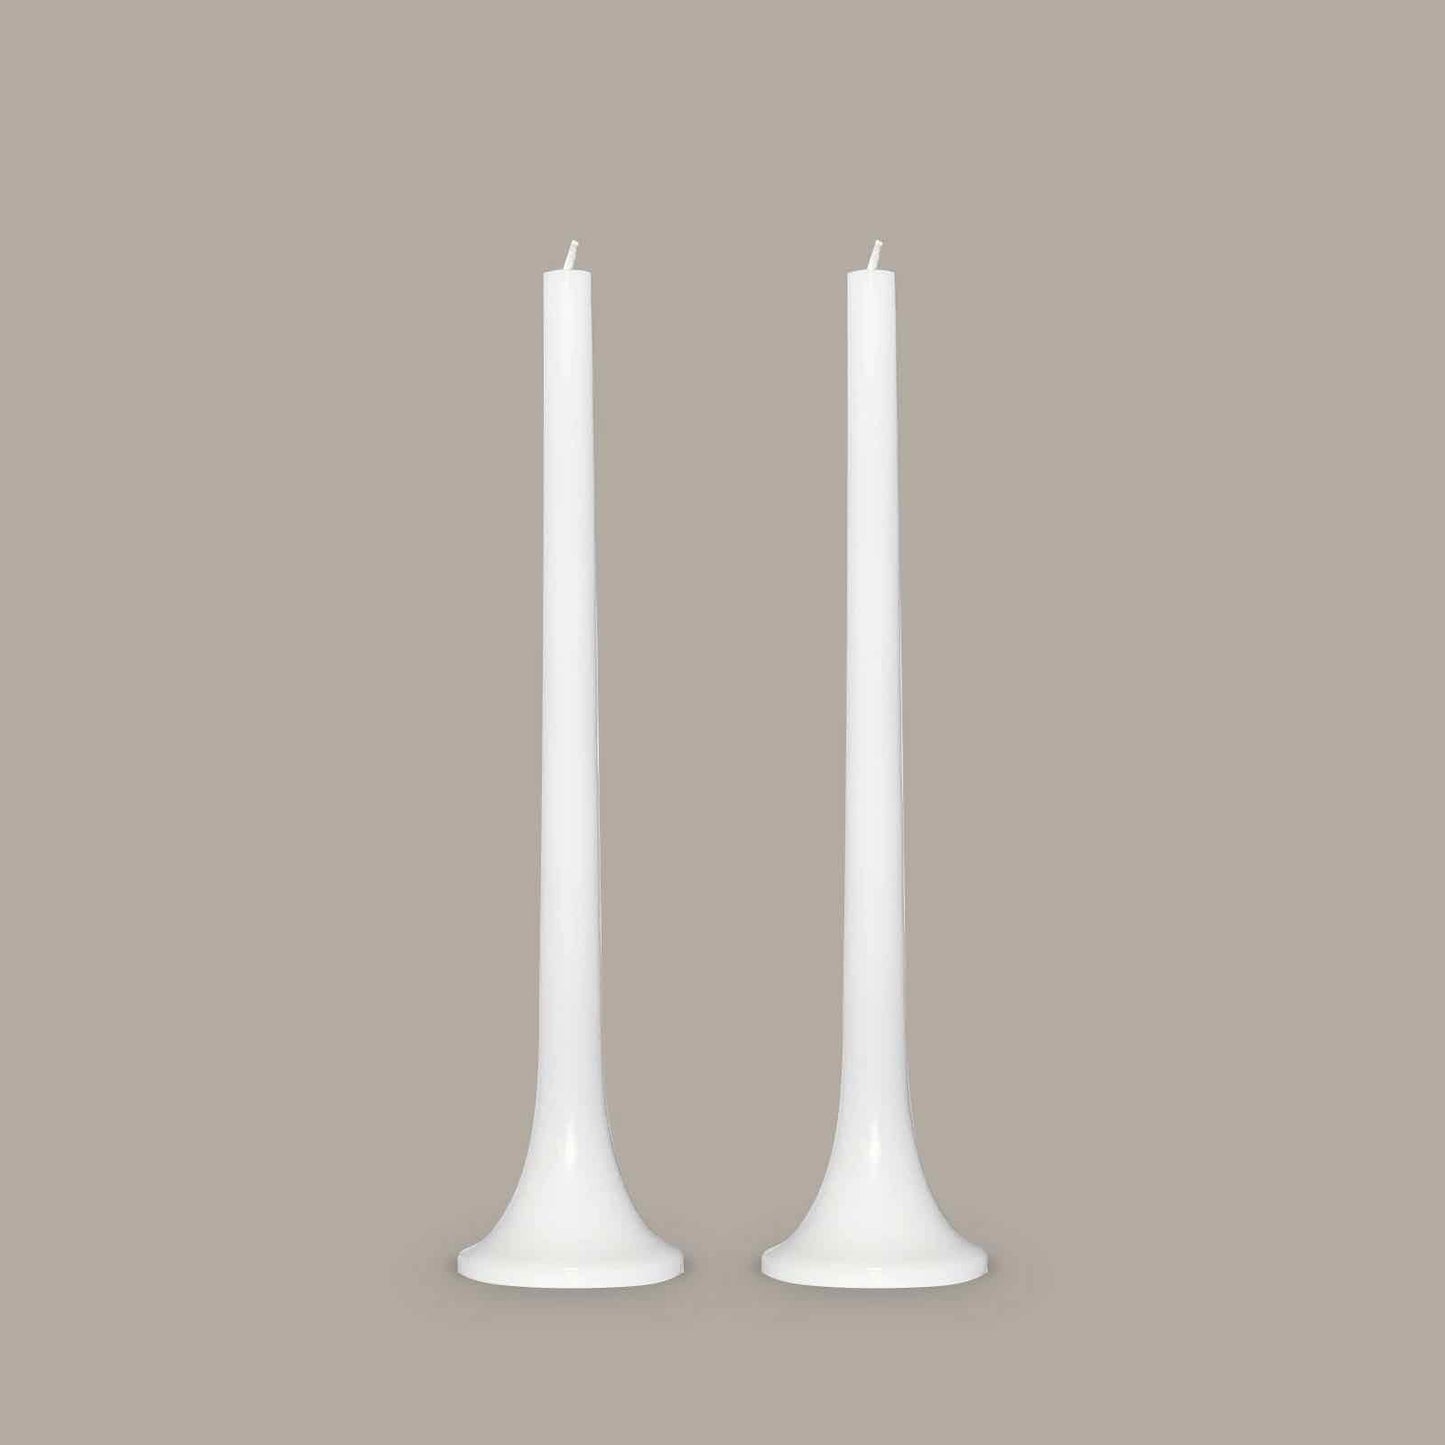 Modern white taper candles